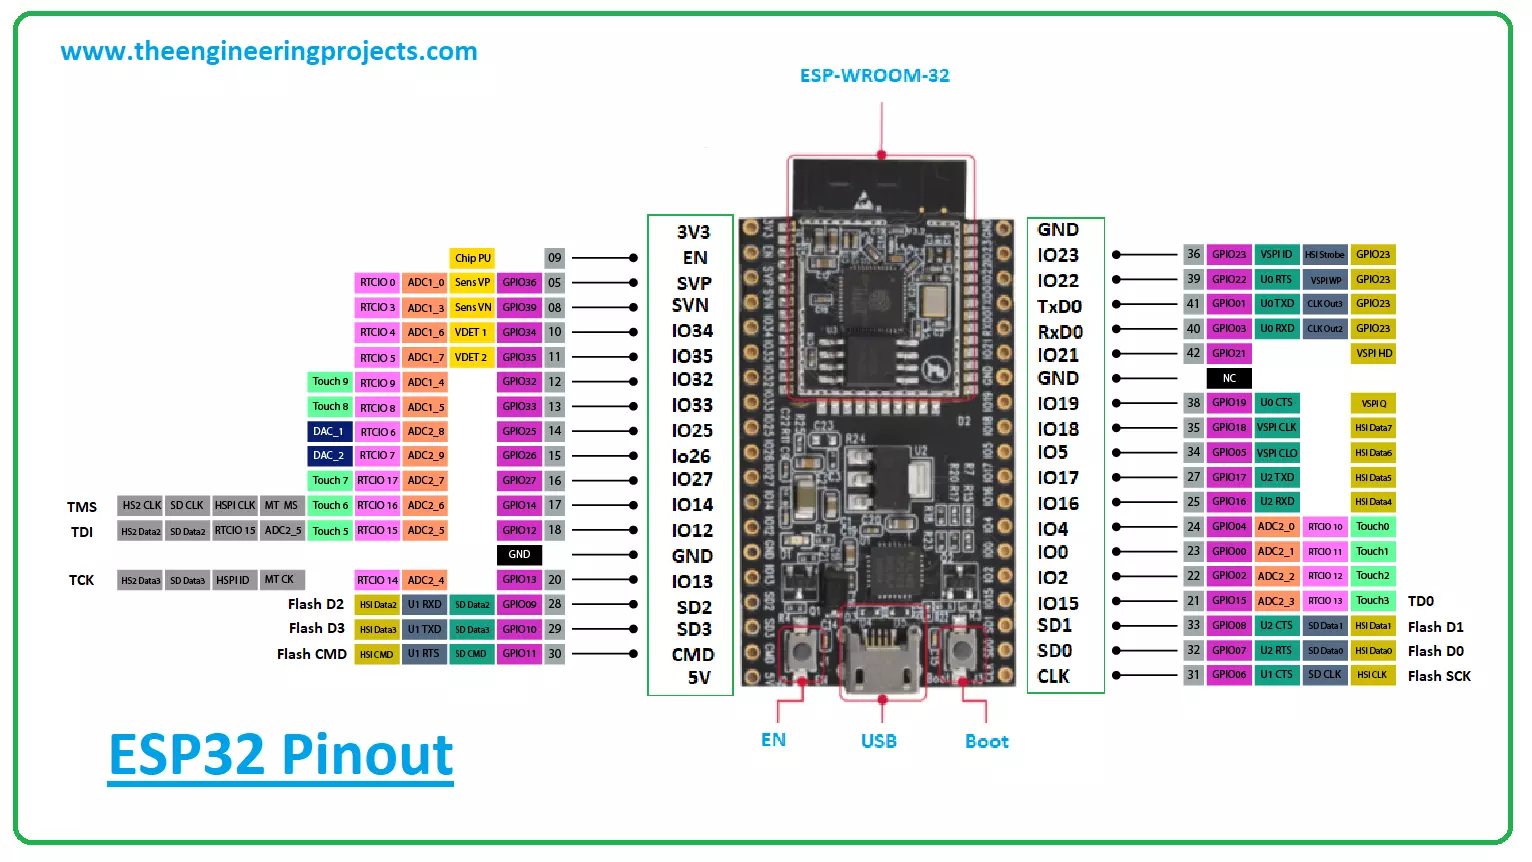 ESP32 Pinout, Datasheet, Features & Applications - The Engineering Projects